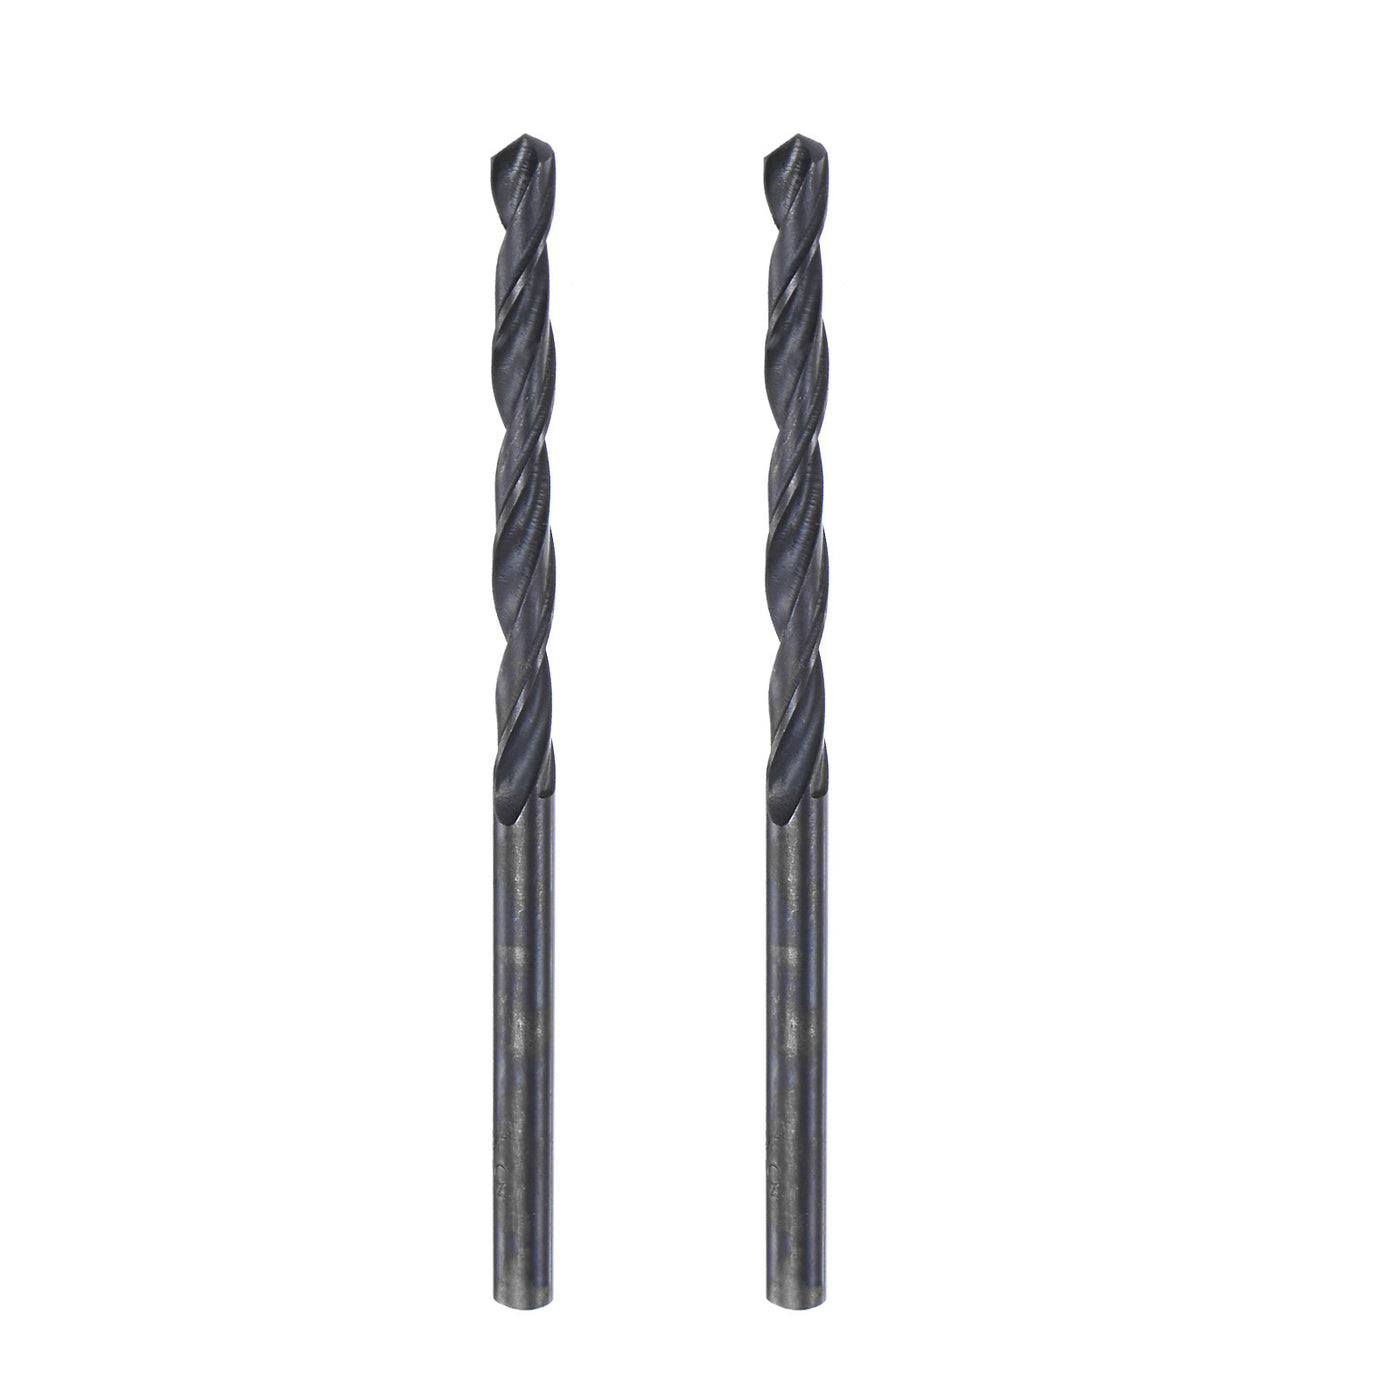 uxcell Uxcell High Speed Steel Twist Drill Bit, 3.7mm Fully Ground Black Oxide 70mm Long 2Pcs